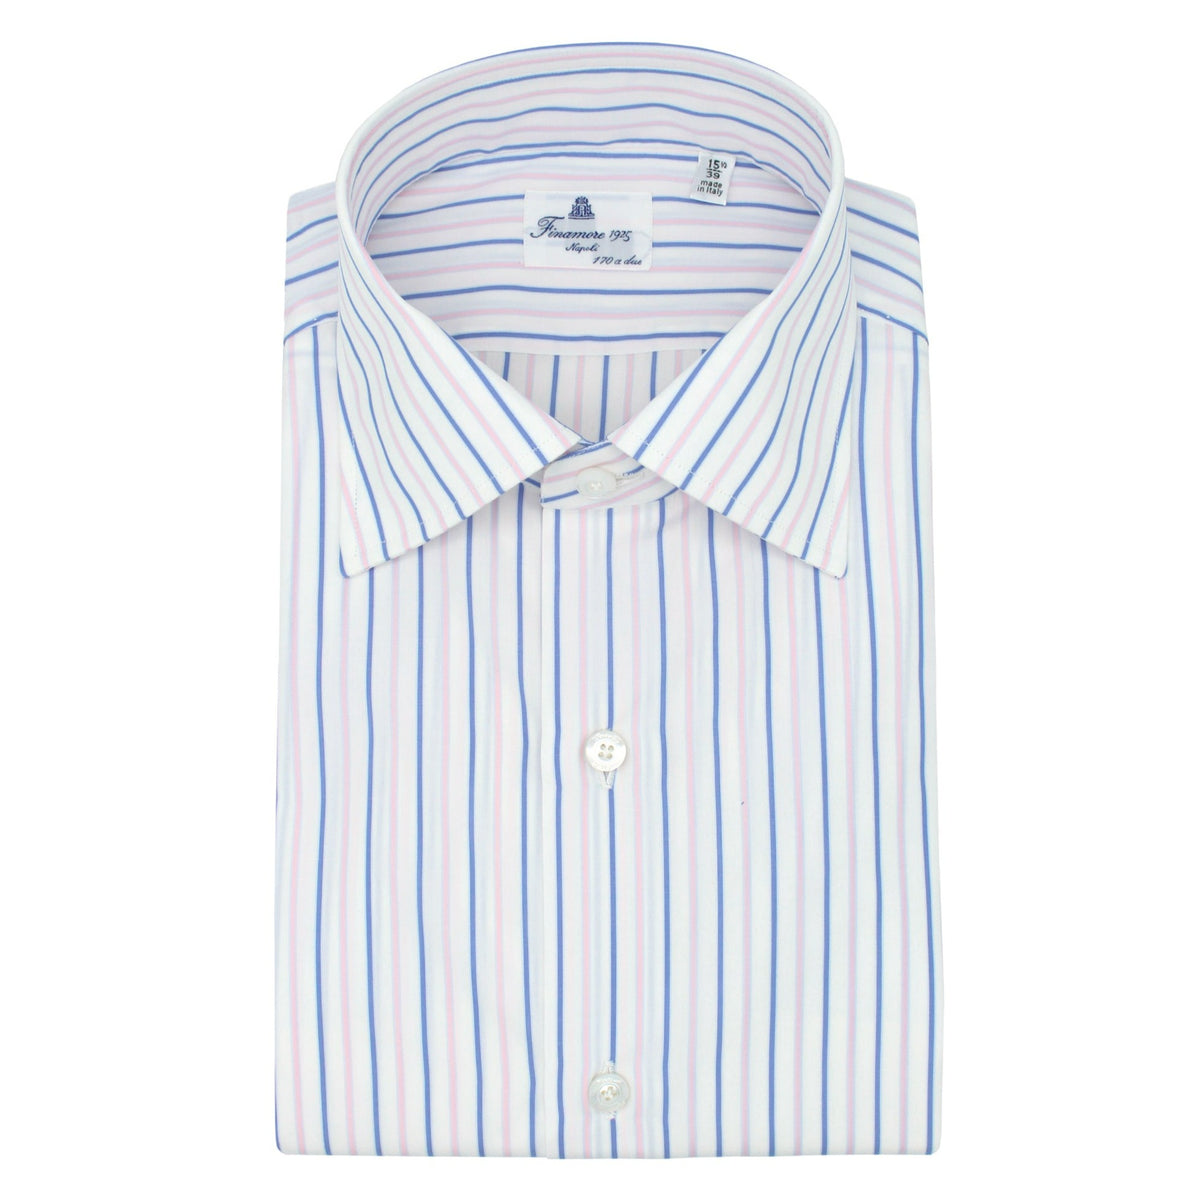 Classic Naples 170 a due white shirt with blue and red stripes